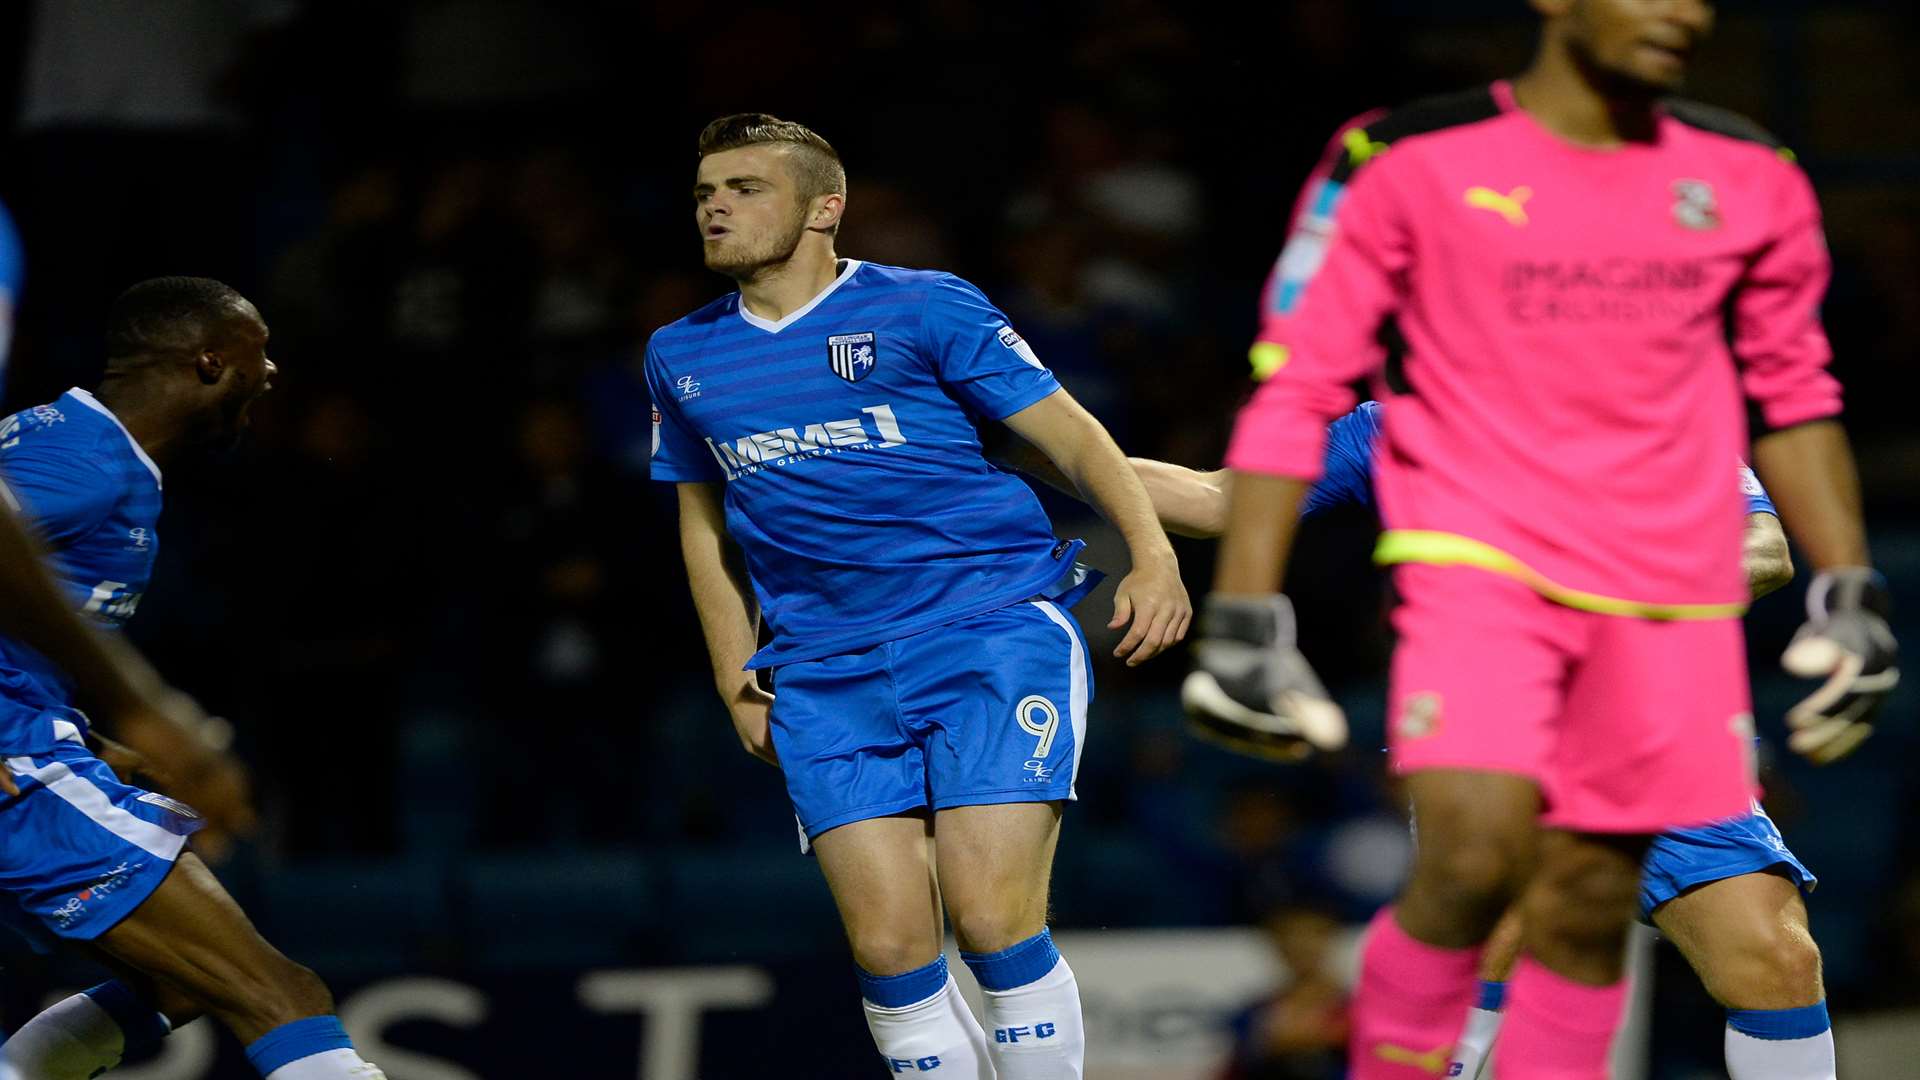 Rory Donnelly celebrates scoring for Gills. Picture: Ady Kerry